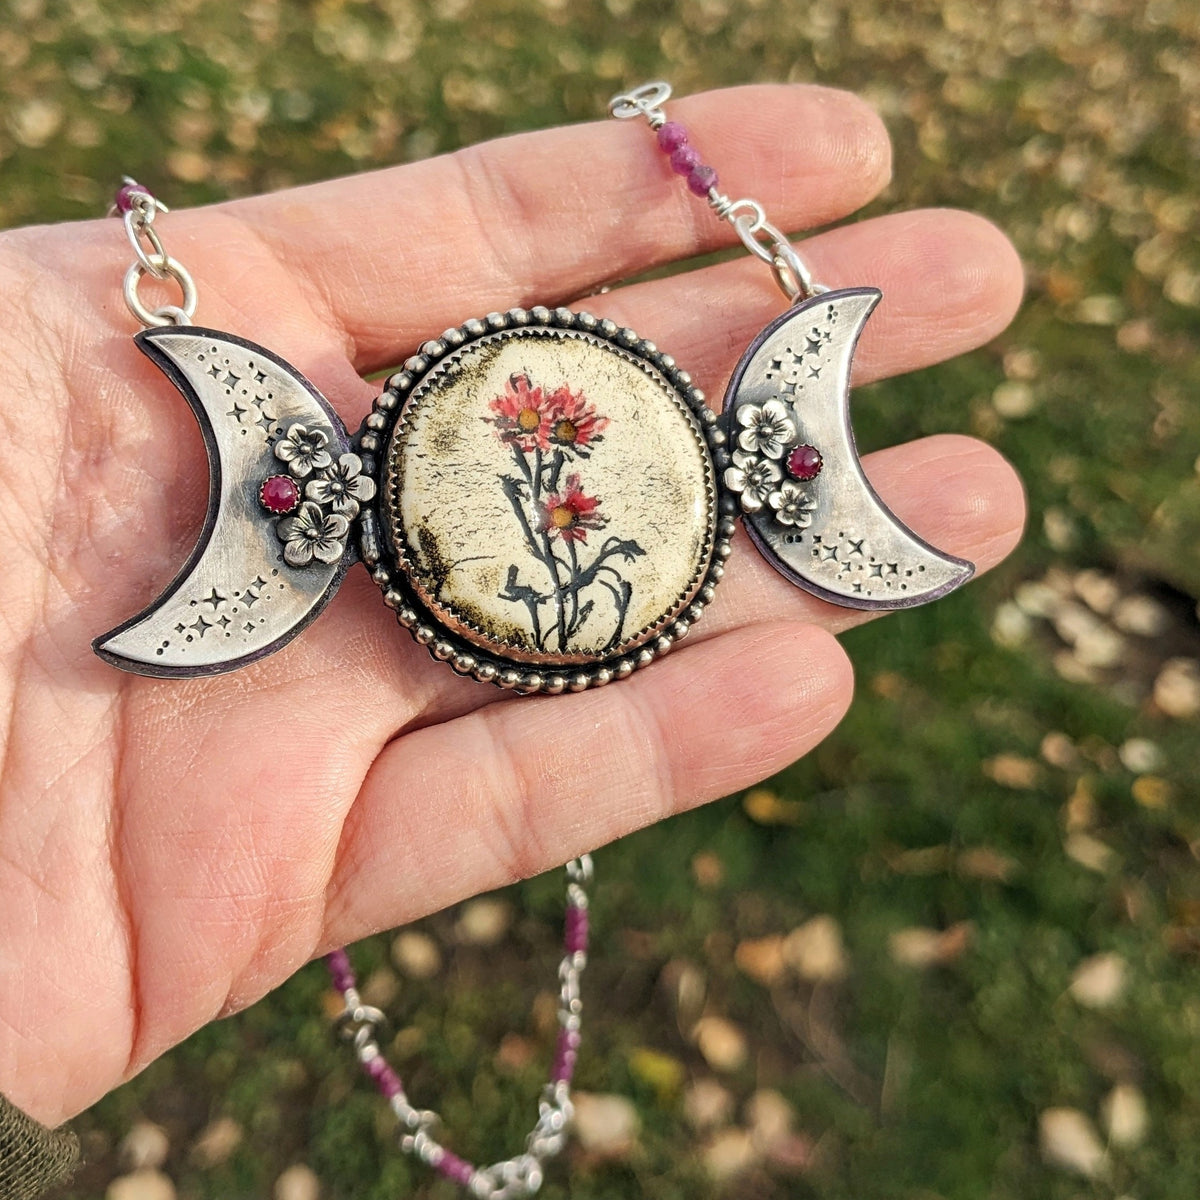 Triple Moon Goddess Necklace with Flowers and Rubies